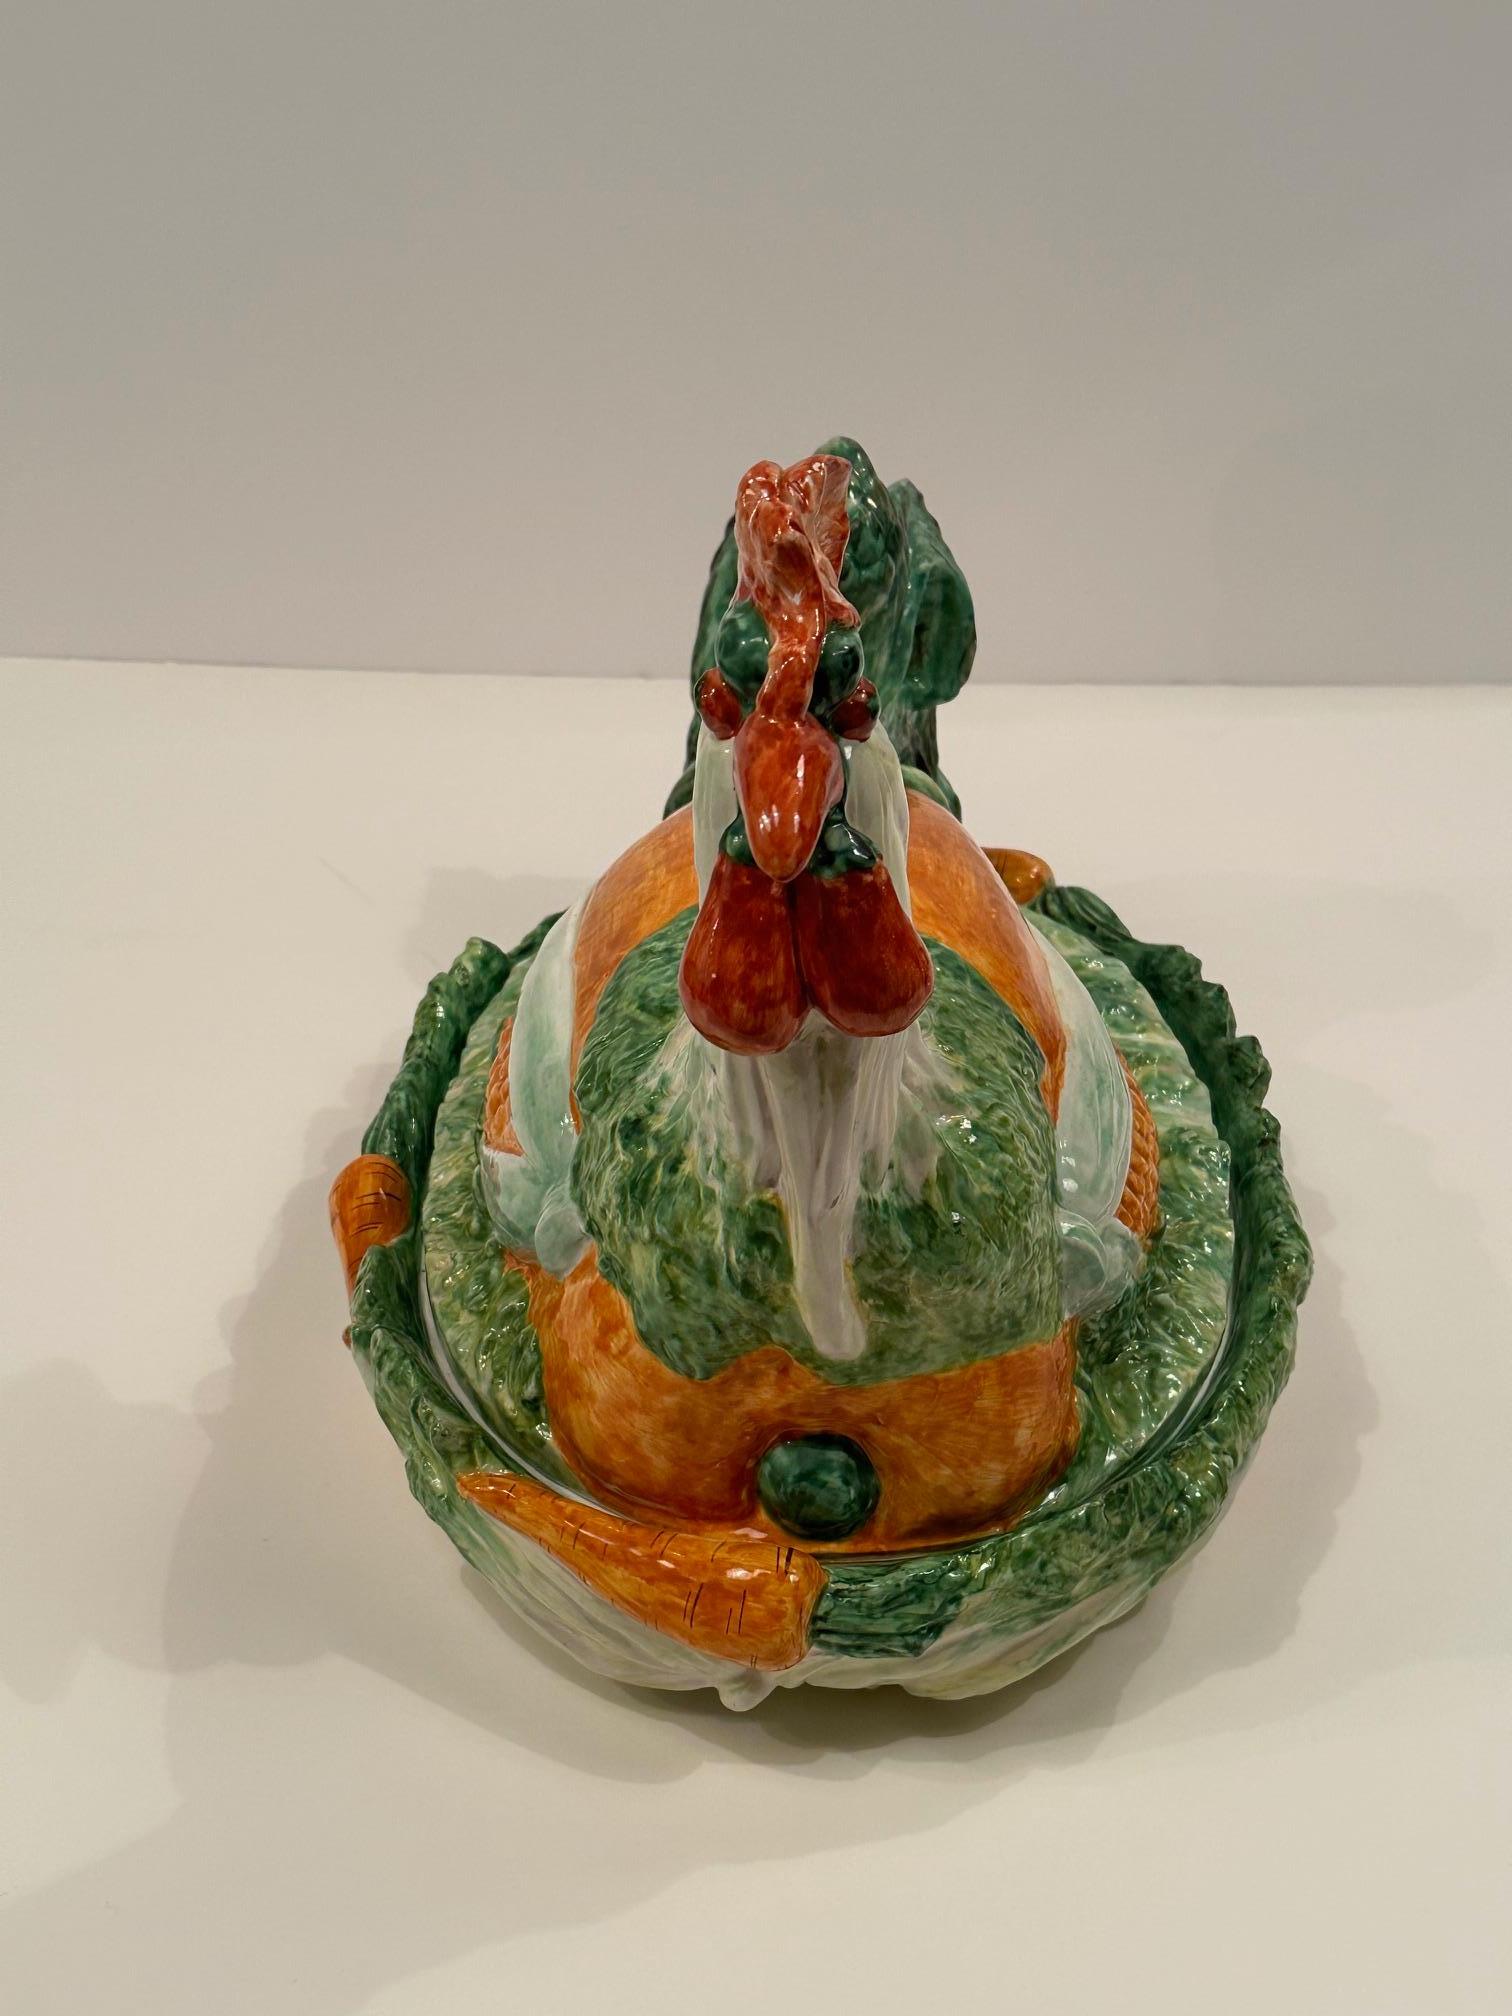 Late 20th Century Marvelous Italian Ceramic Majolica Rooster and Vegetable Tureen For Sale